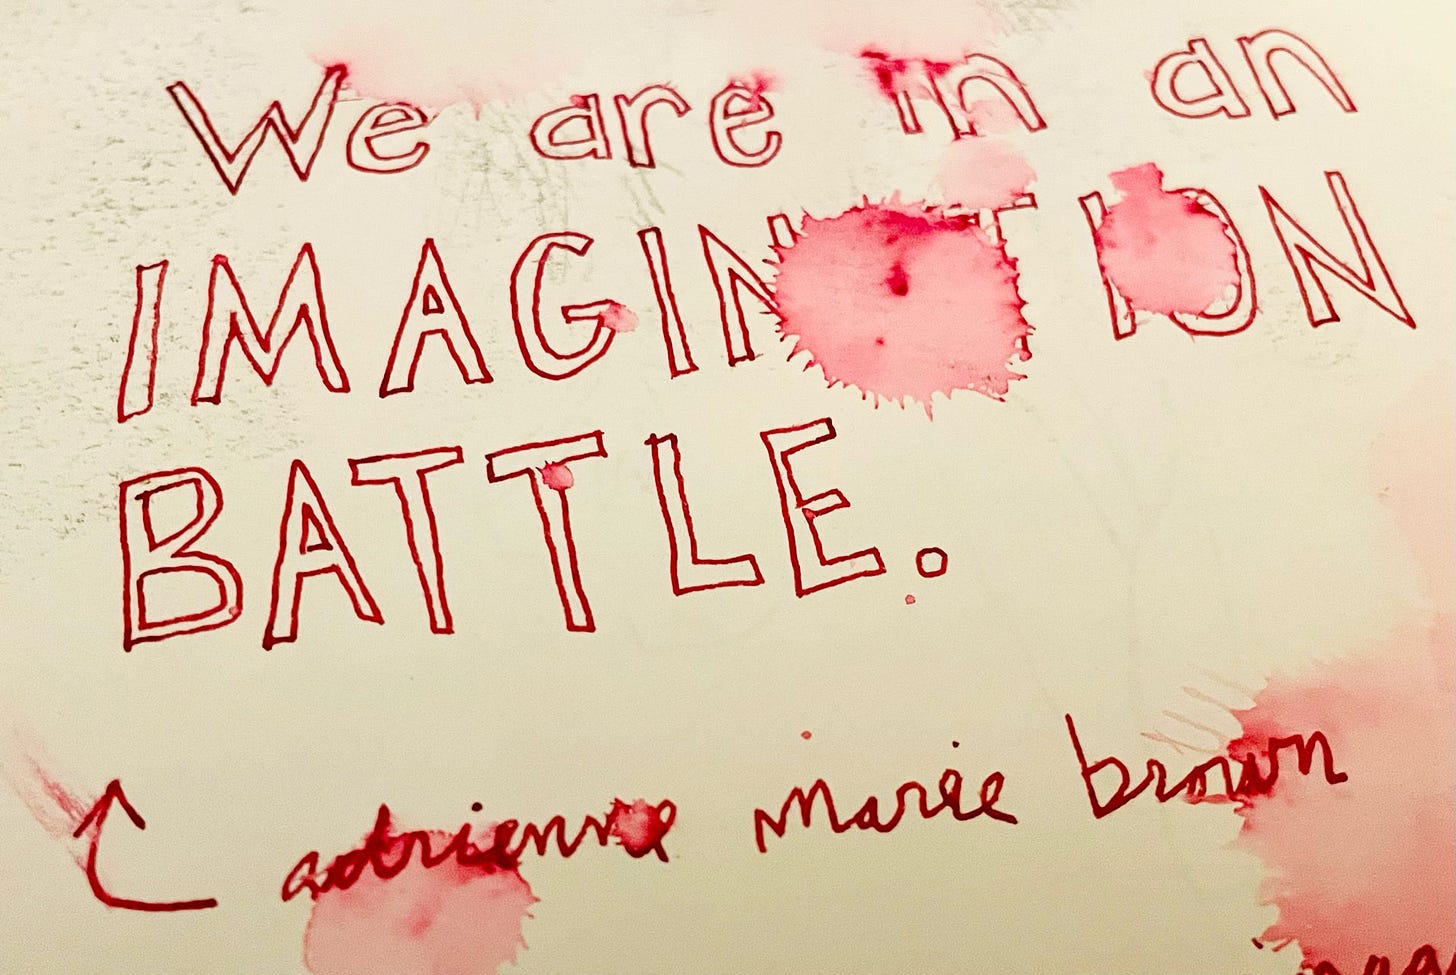 "we are in an imagination battle" – adrienne maree brown